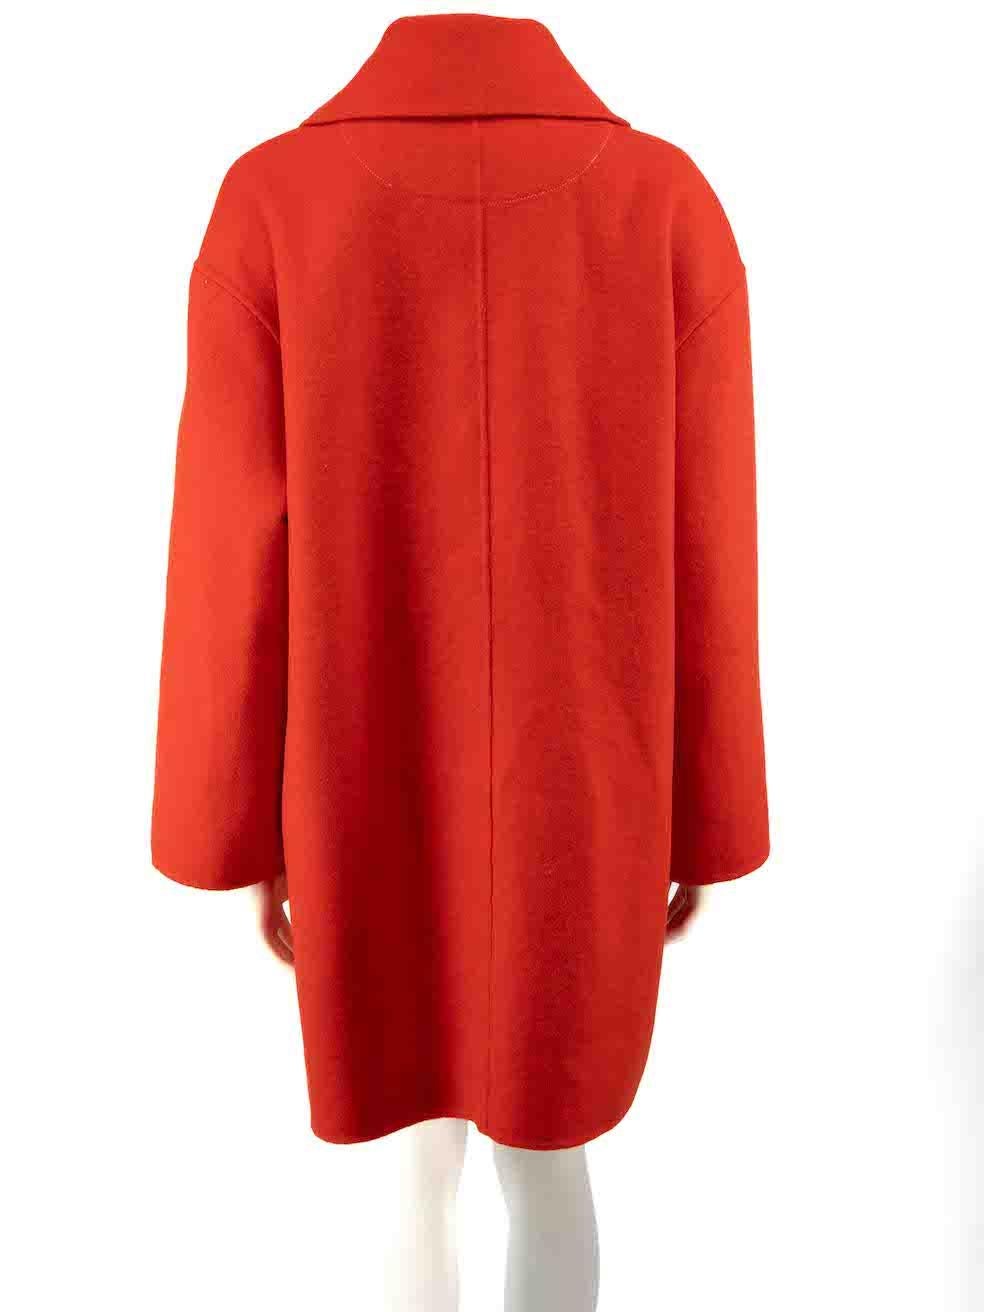 Ganni Red Wool Mid-Length Coat Size M In Good Condition For Sale In London, GB